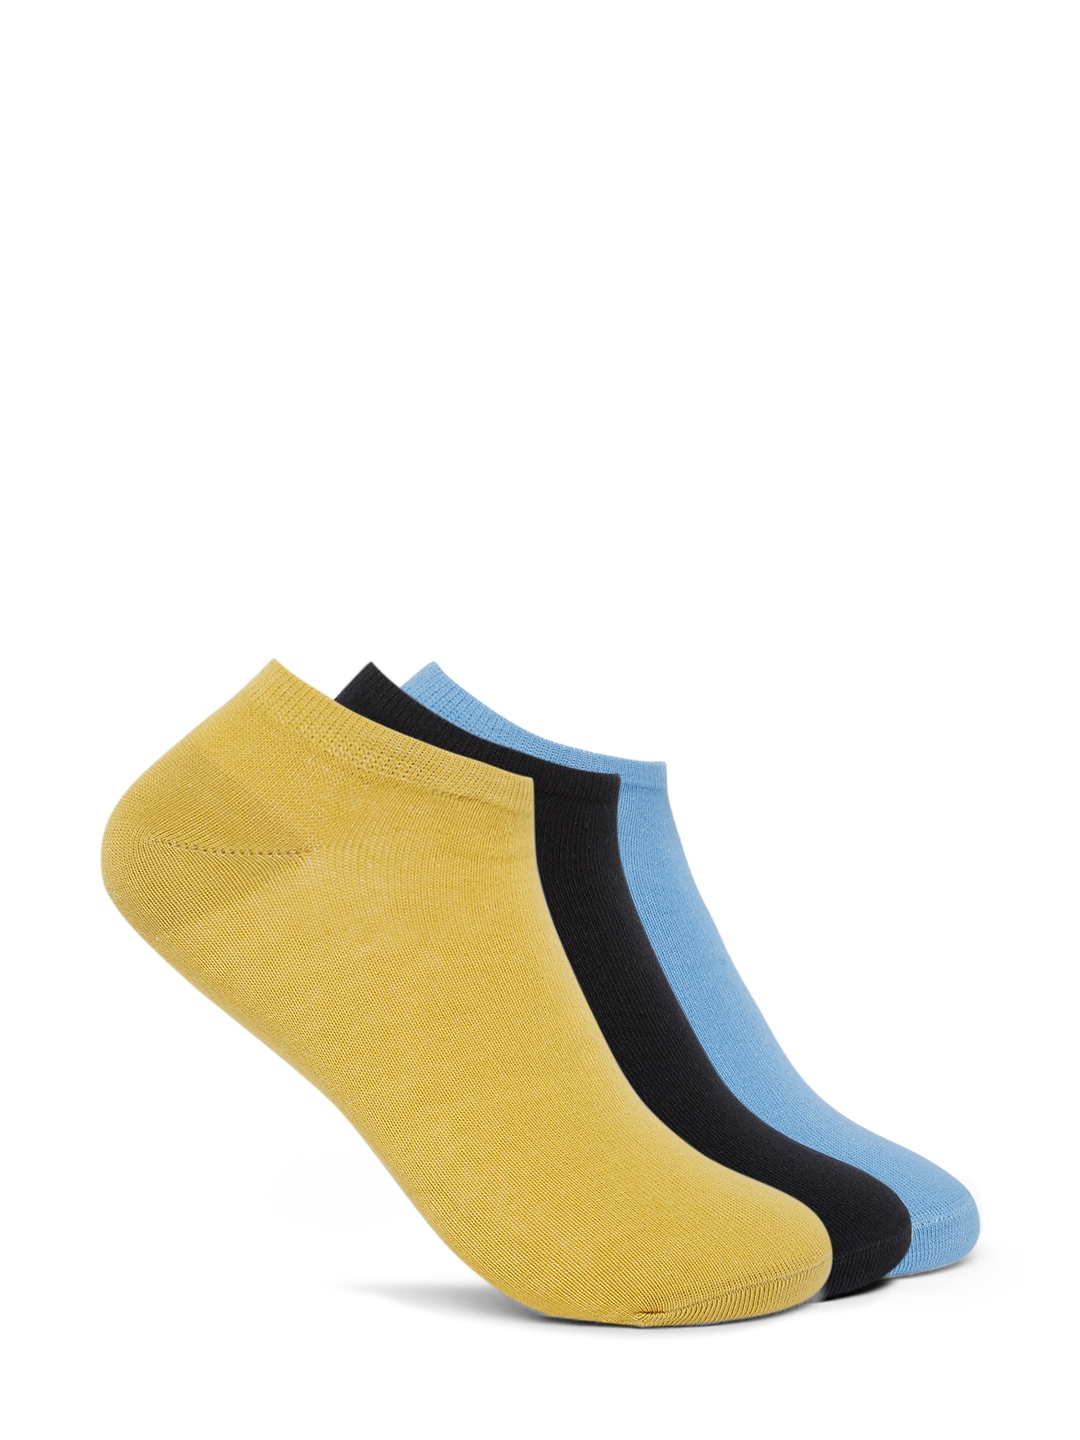 Smarty Pants | Smarty Pants women pack of 3 solid cotton ankle length socks.